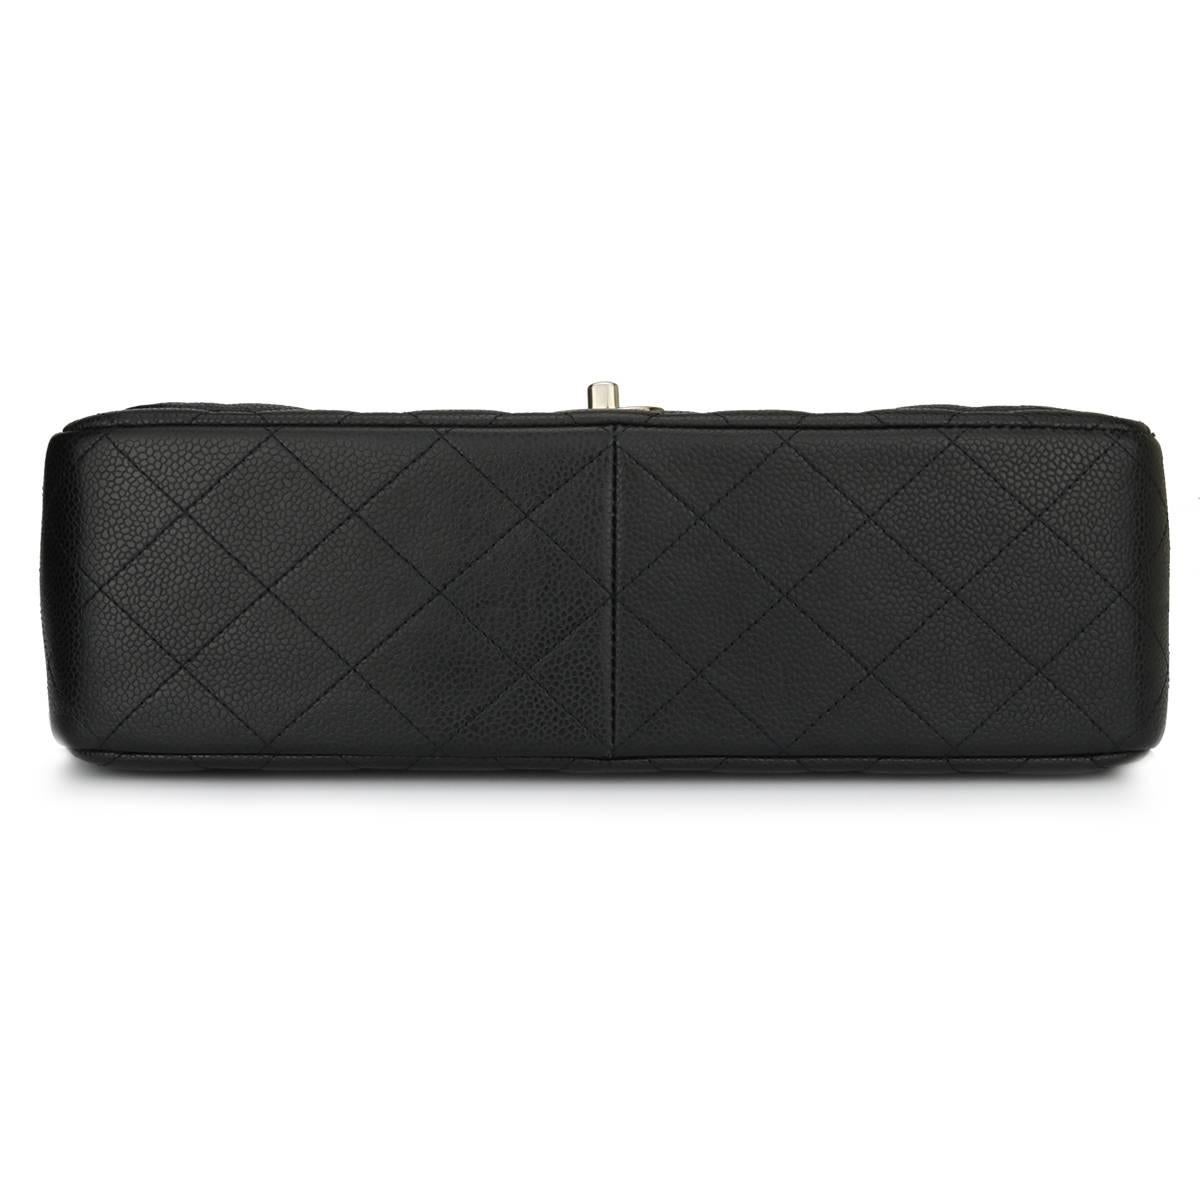 Women's or Men's Chanel Classic Black Caviar Jumbo Double Flap Bag with Silver Hardware, 2010